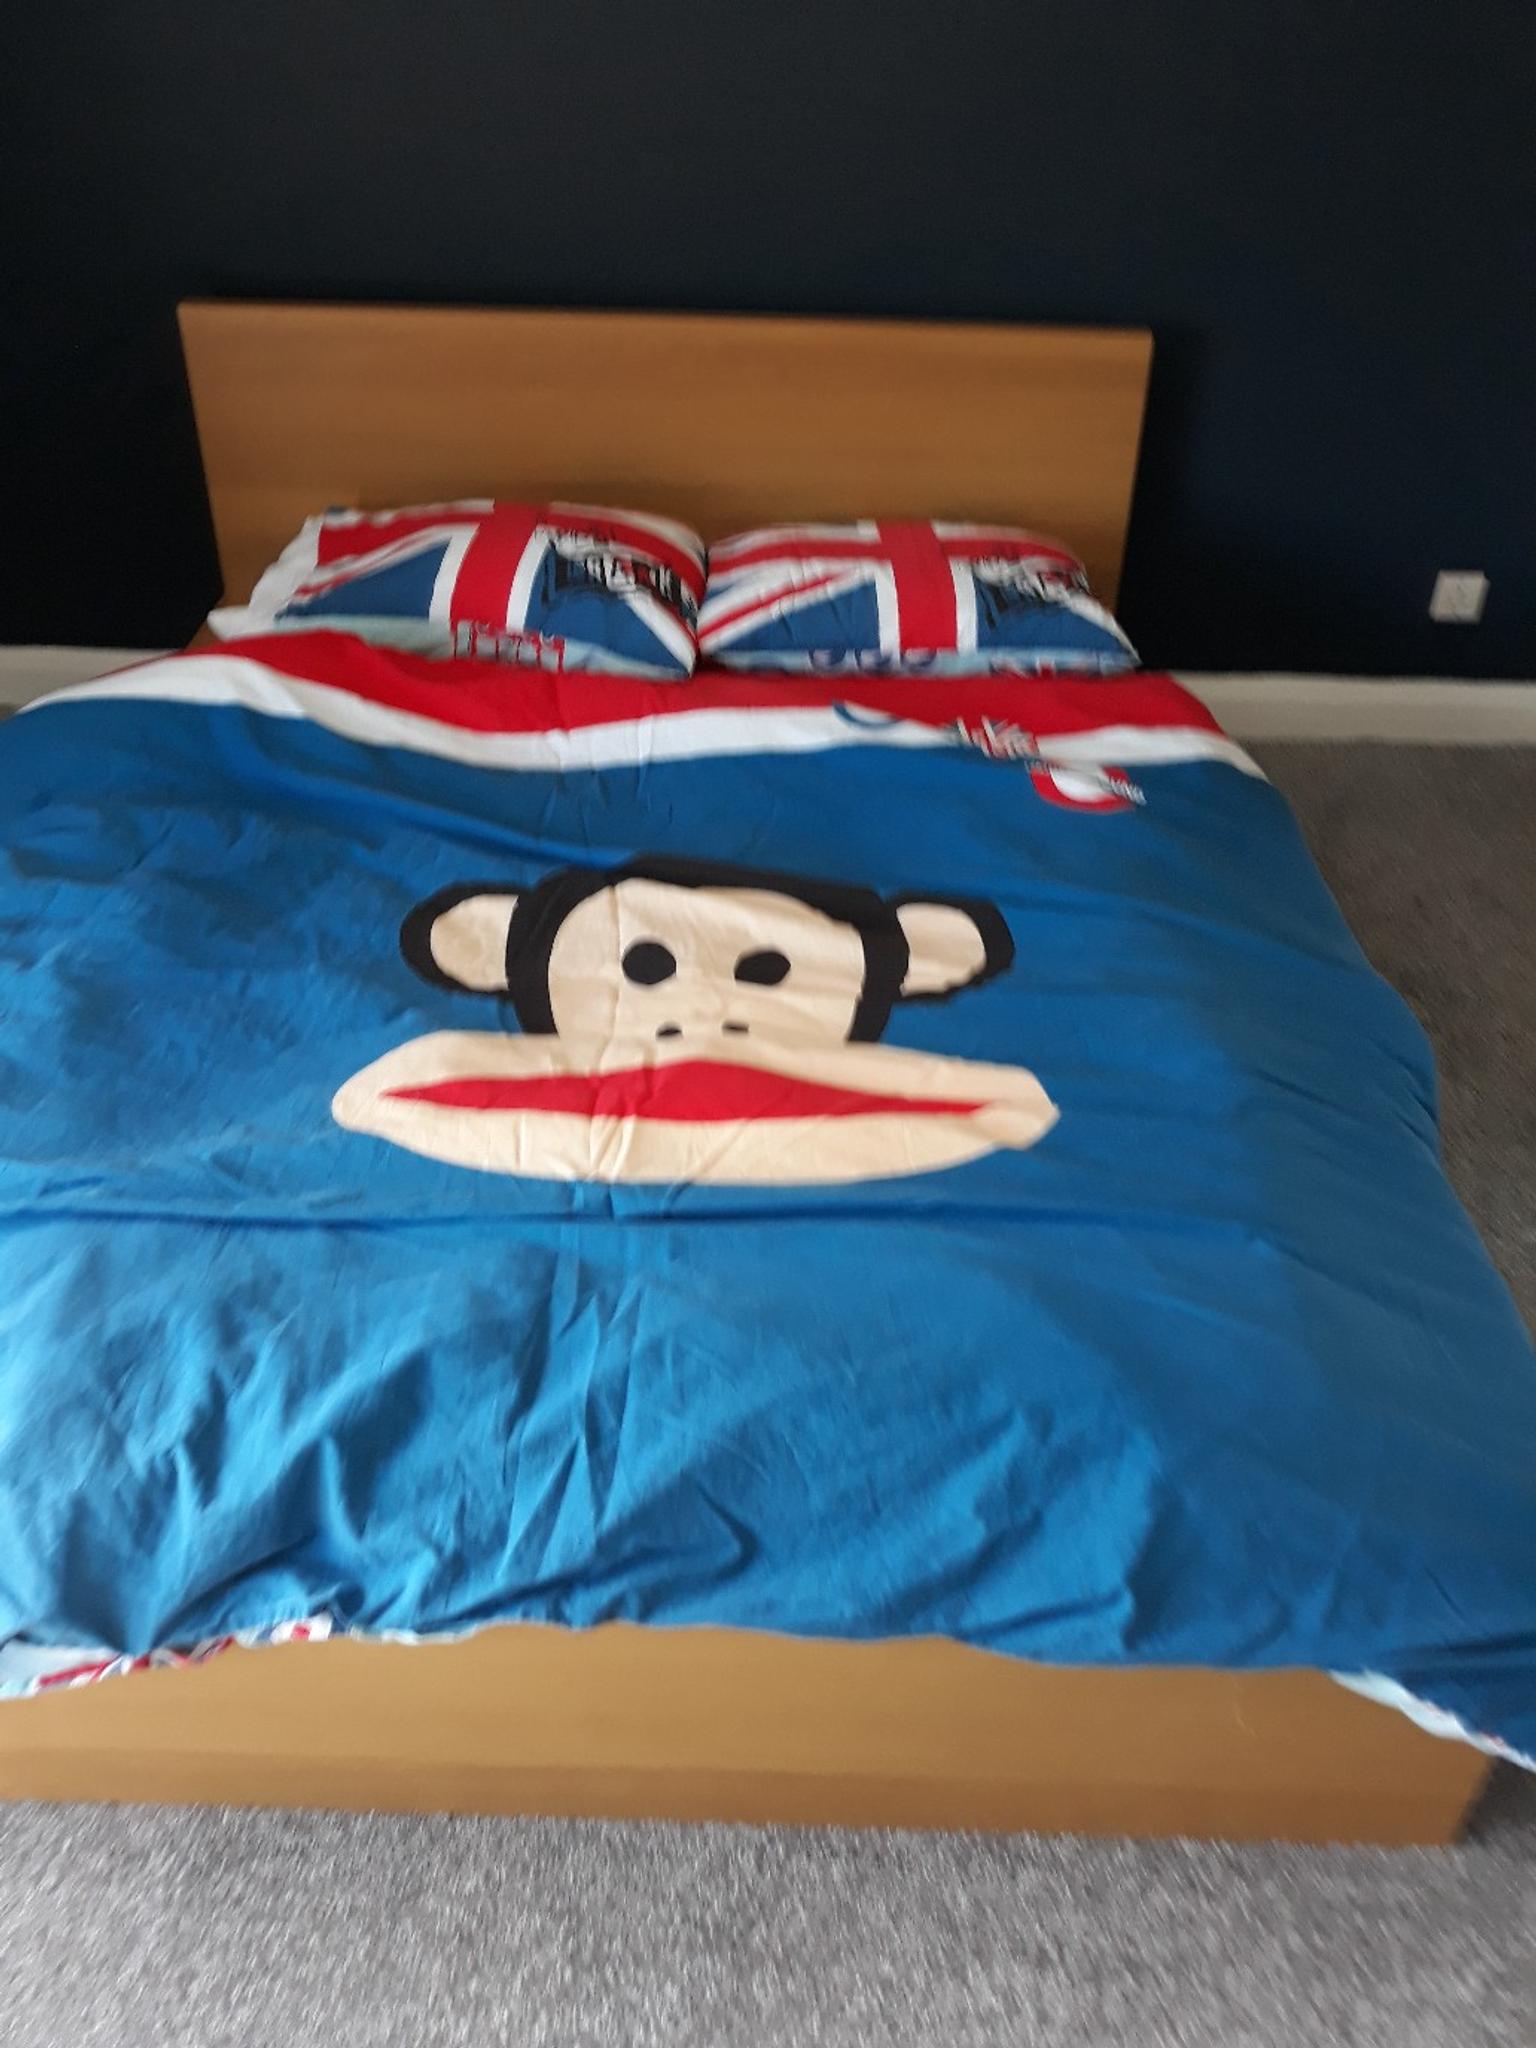 Paul Frank Double Duvet Cover In Sedgefield For 7 00 For Sale